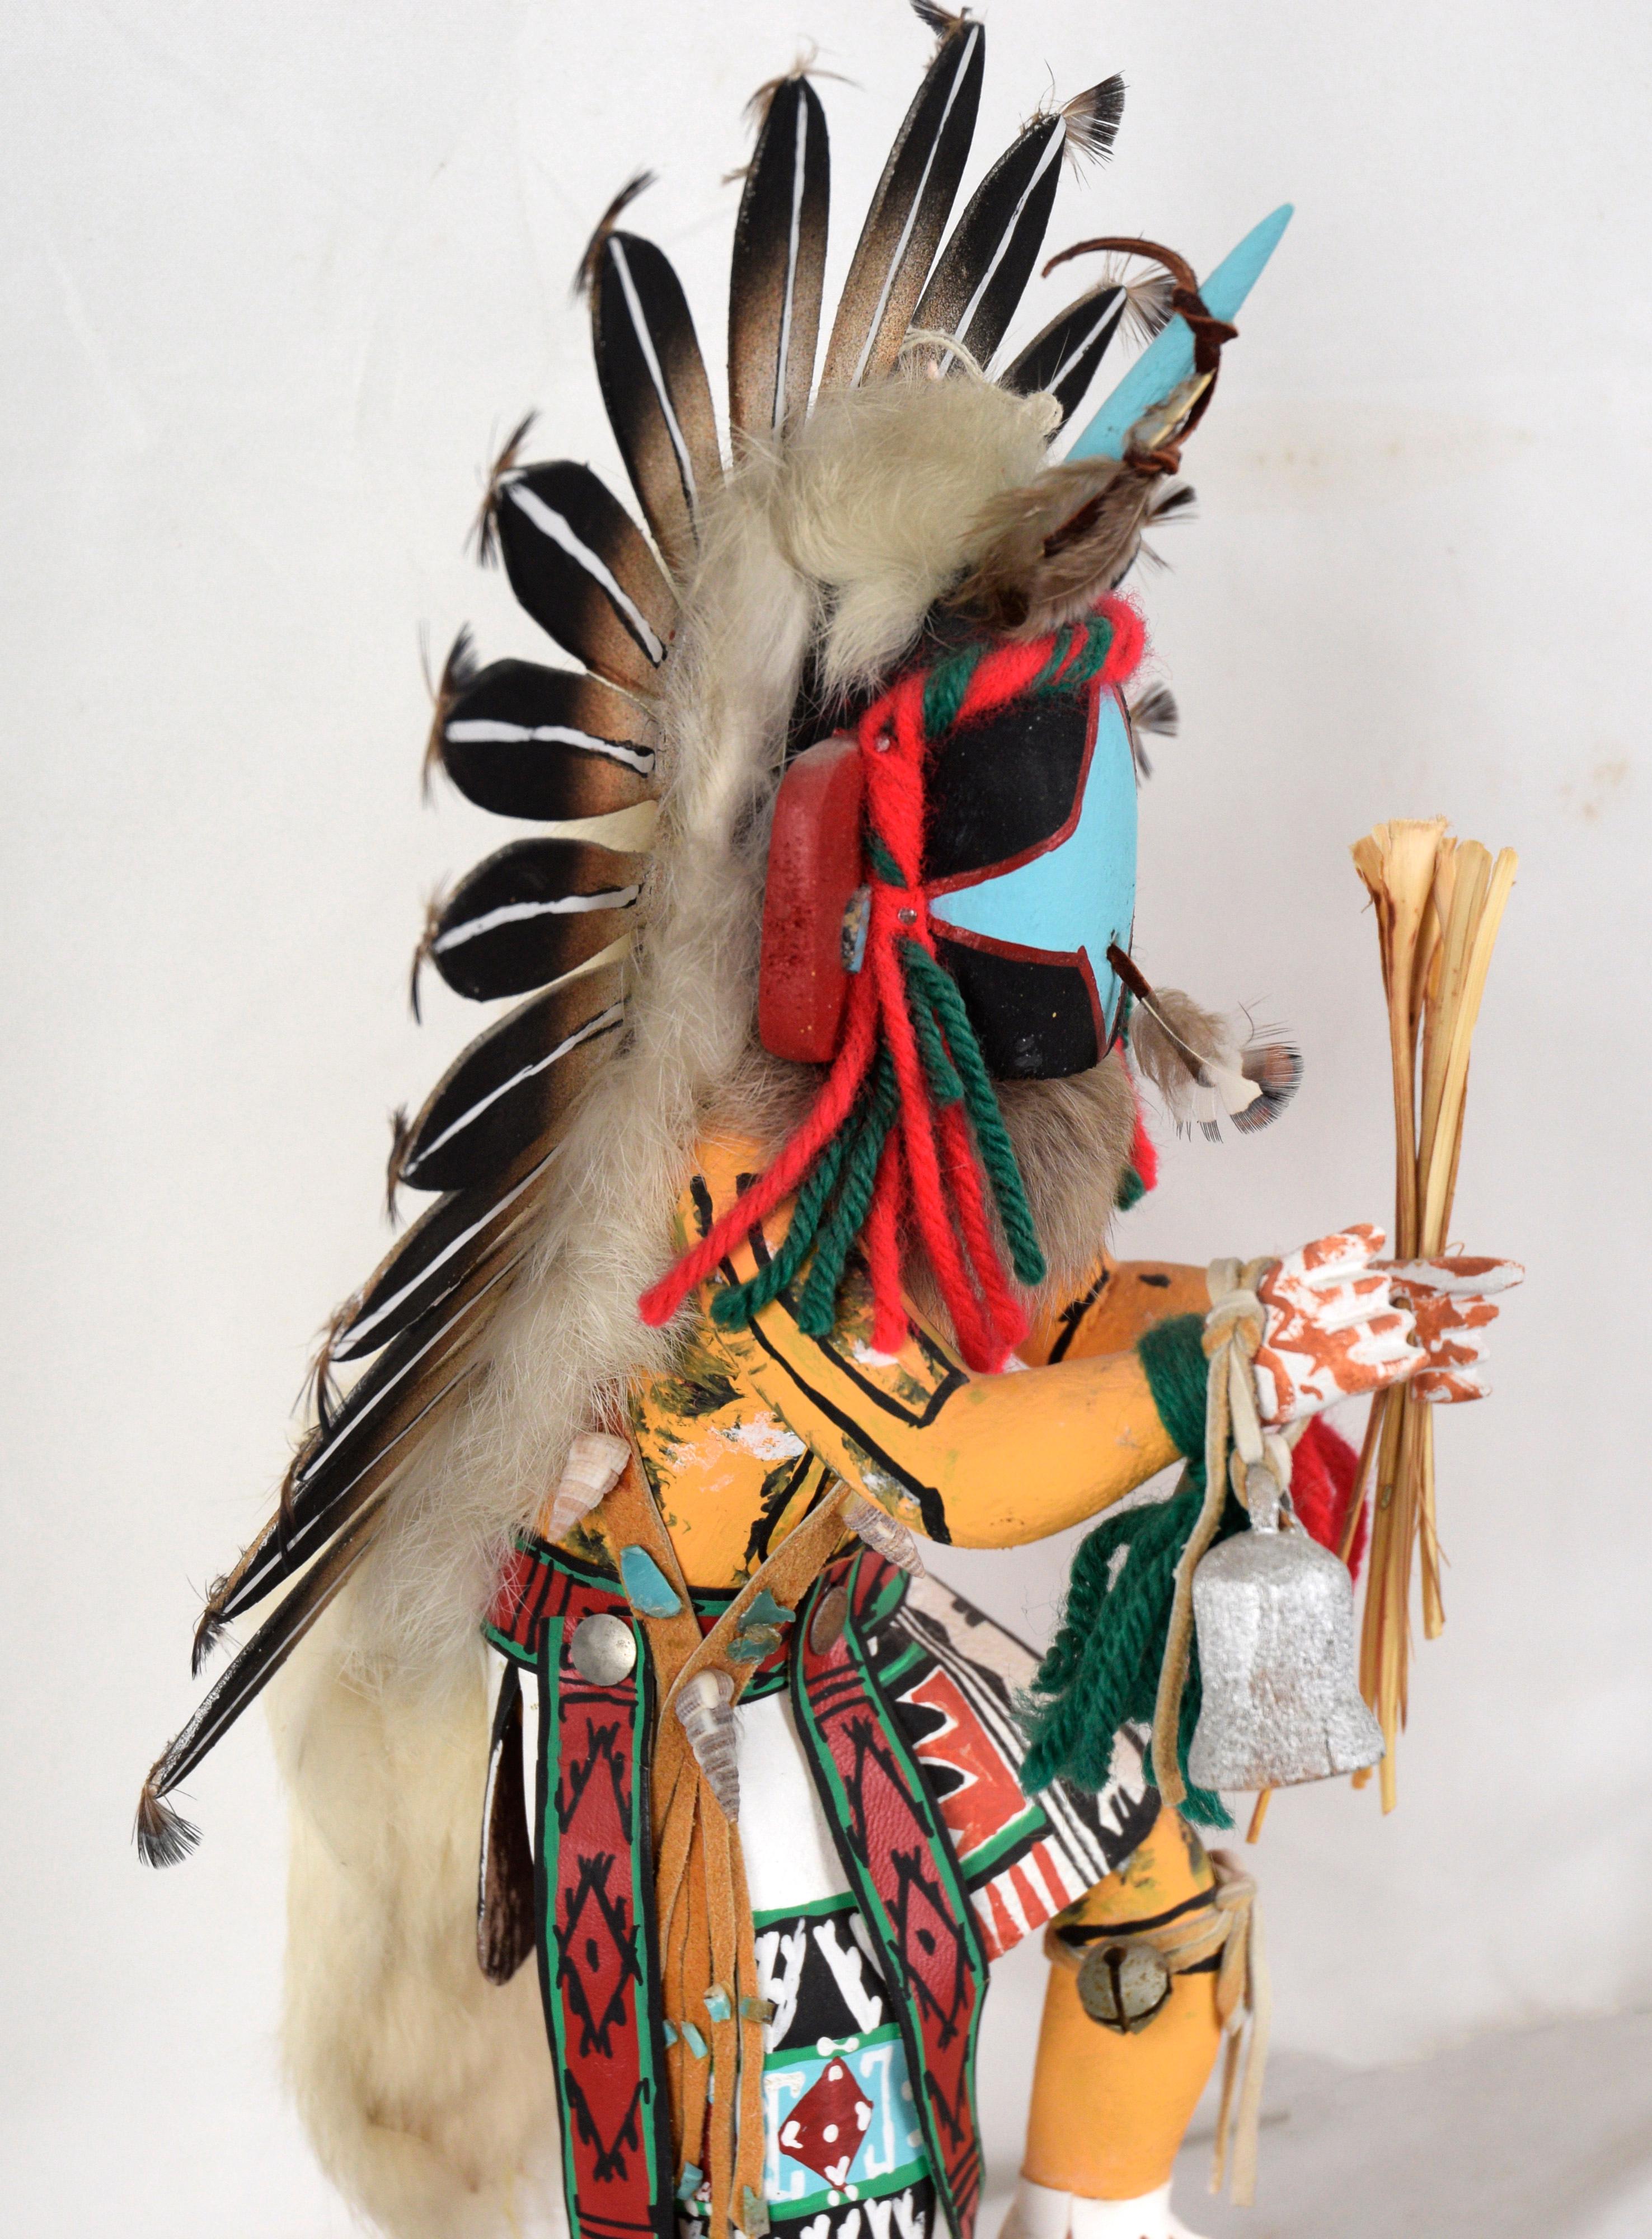 Native American Chasing Star Performing a Dance - Kachina Doll by Rena Jean (Whitehorse) For Sale